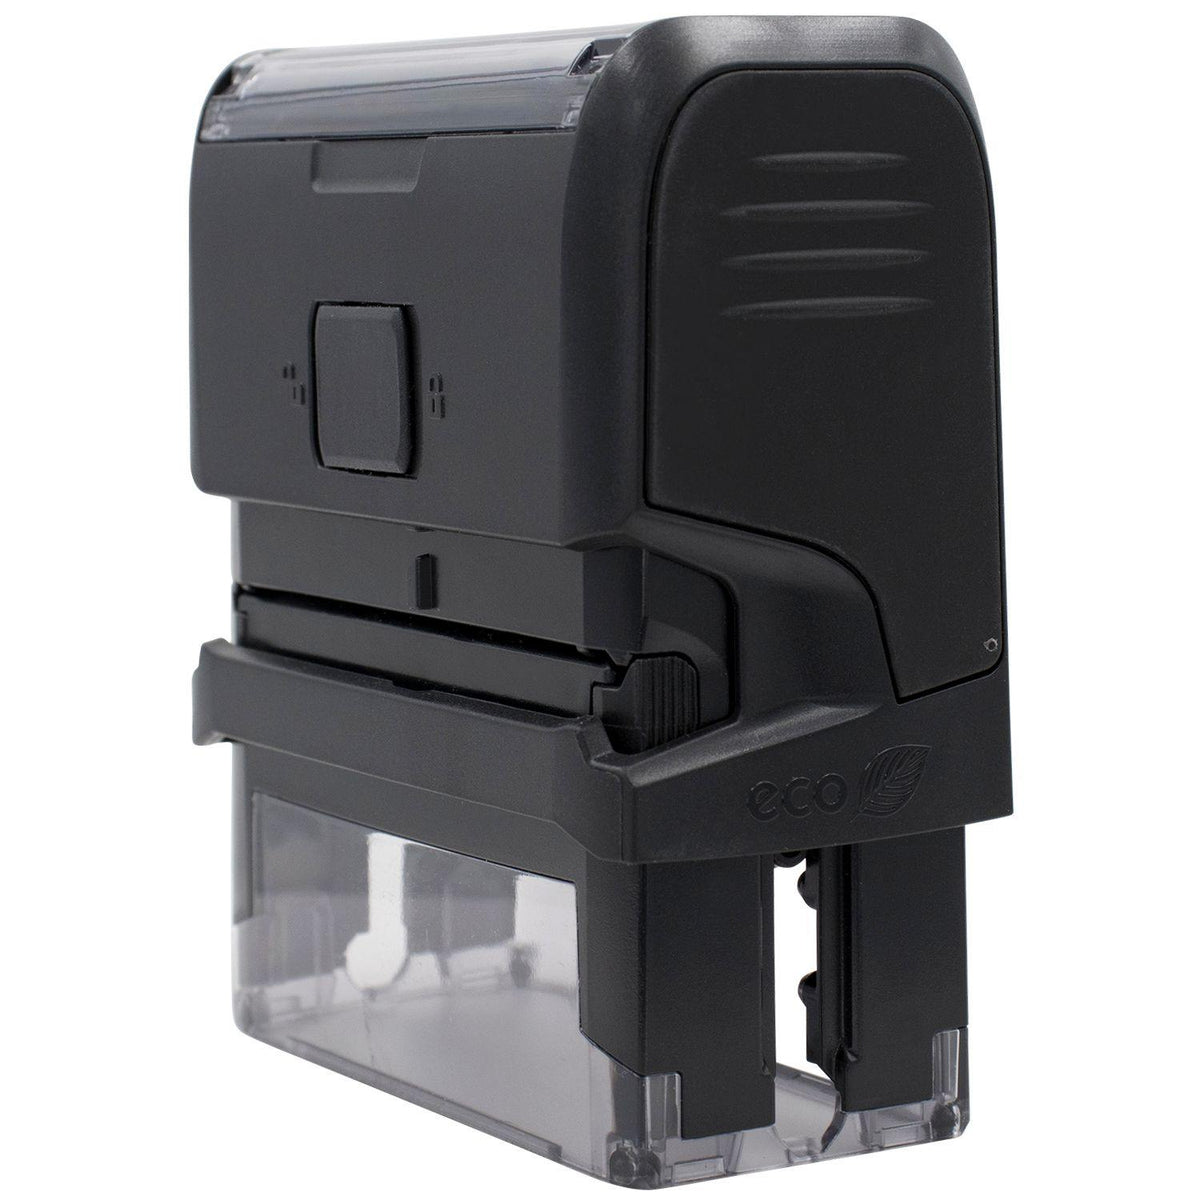 Self Inking Excellent Work Stamp - Engineer Seal Stamps - Brand_Trodat, Impression Size_Small, Stamp Type_Self-Inking Stamp, Type of Use_Teacher